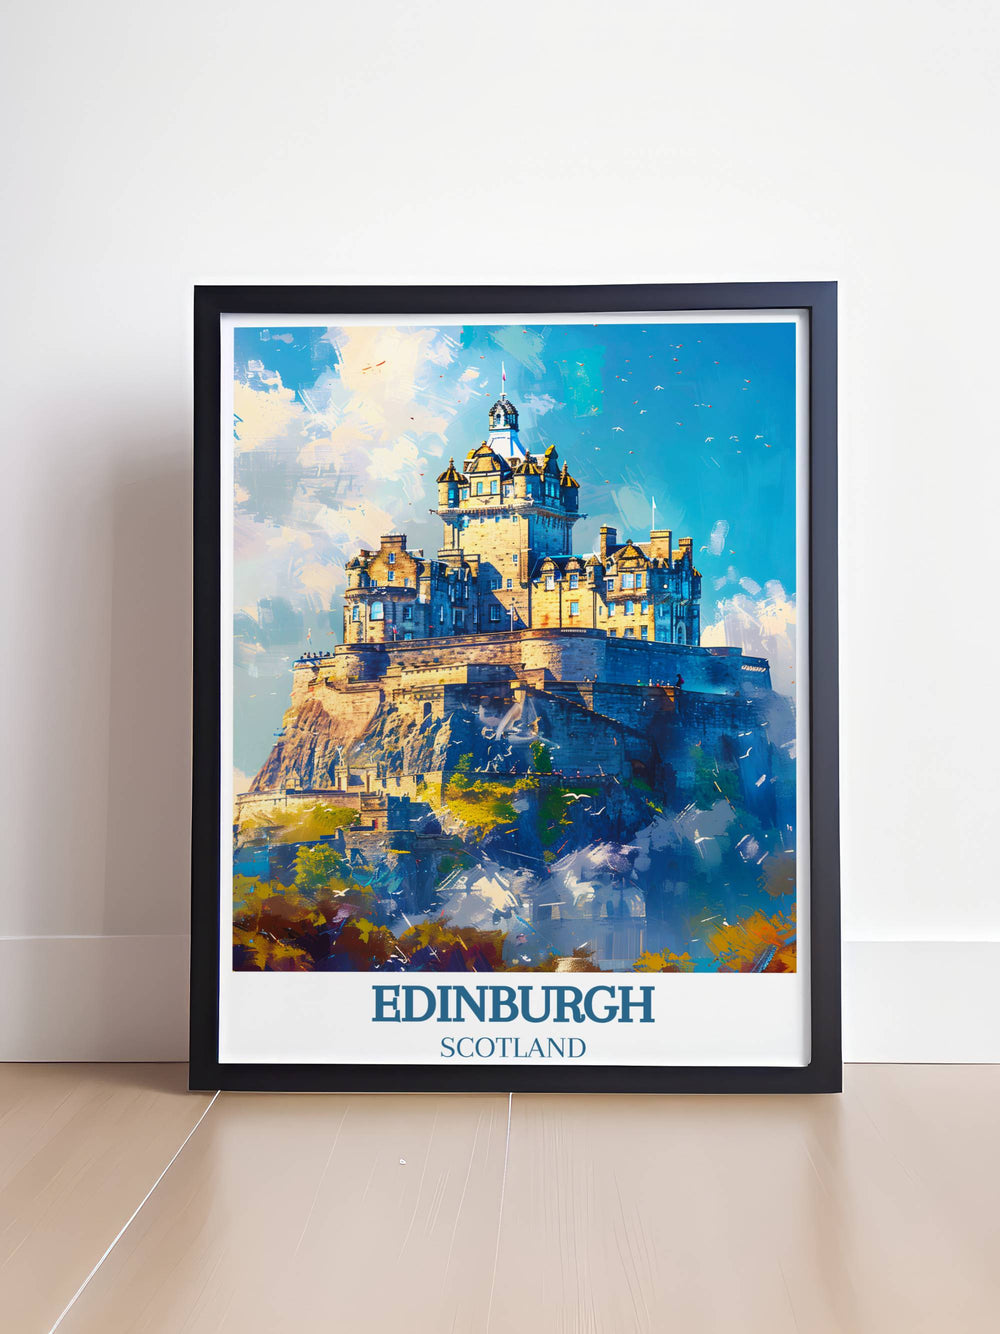 Stunning artwork depicts Edinburgh's timeless charm, offering a captivating glimpse into the heart of this historic European city, ideal for Scotland enthusiasts.